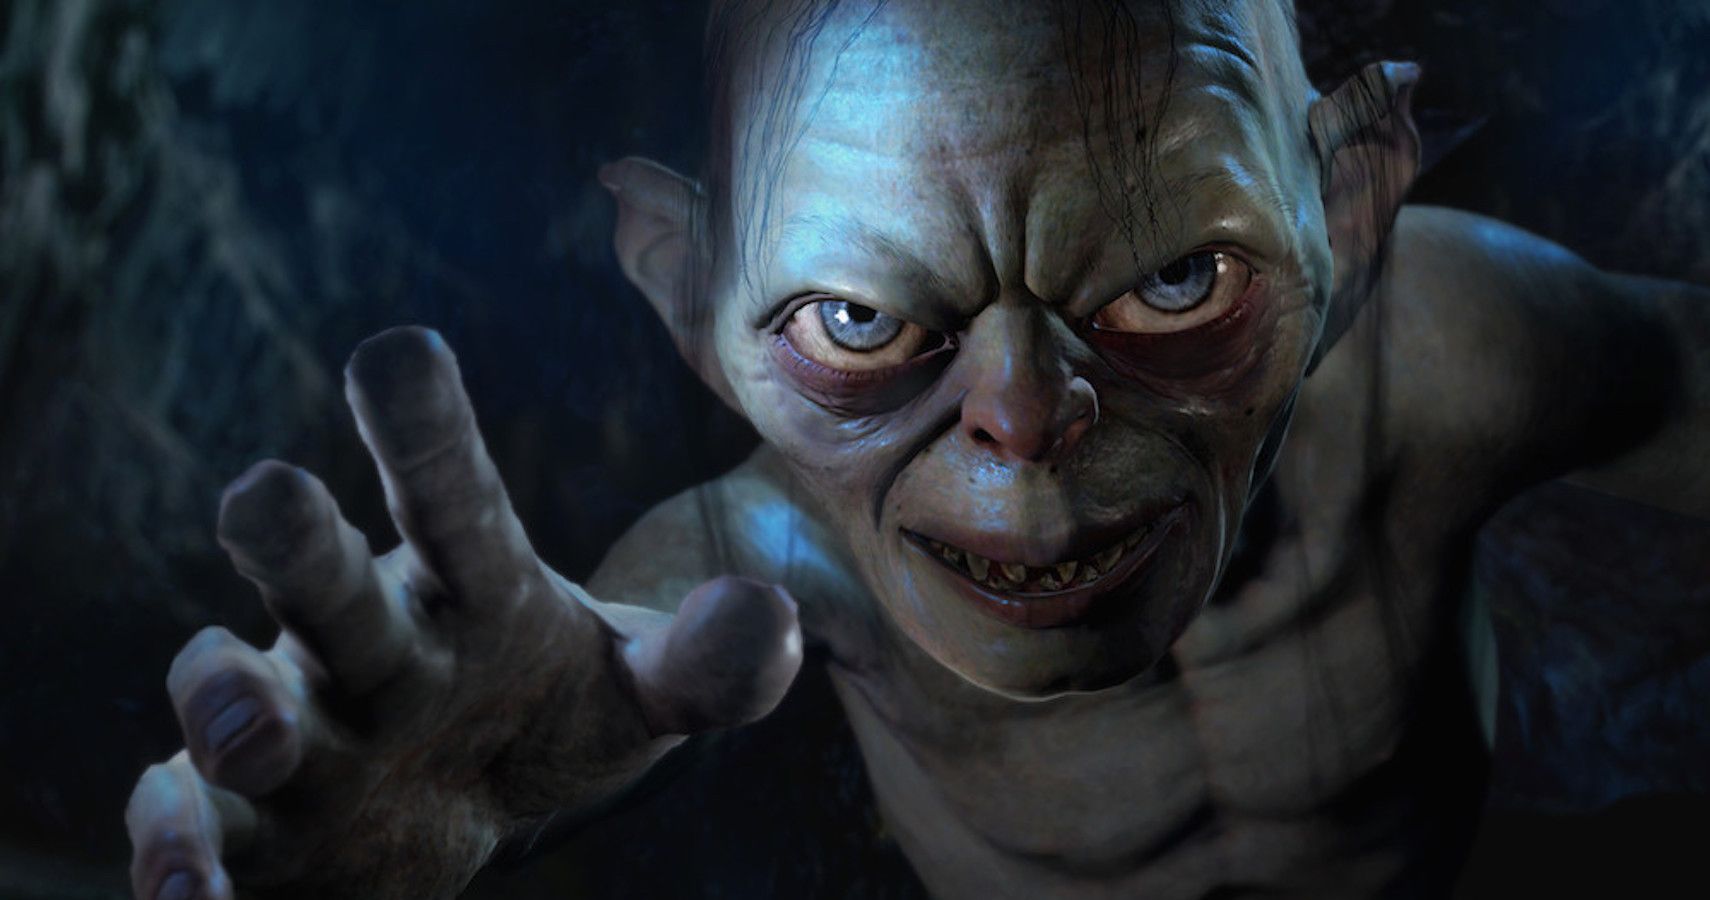 Daedalic Announces Lord Of The Rings Narrative Adventure Game And It’s All About Gollum